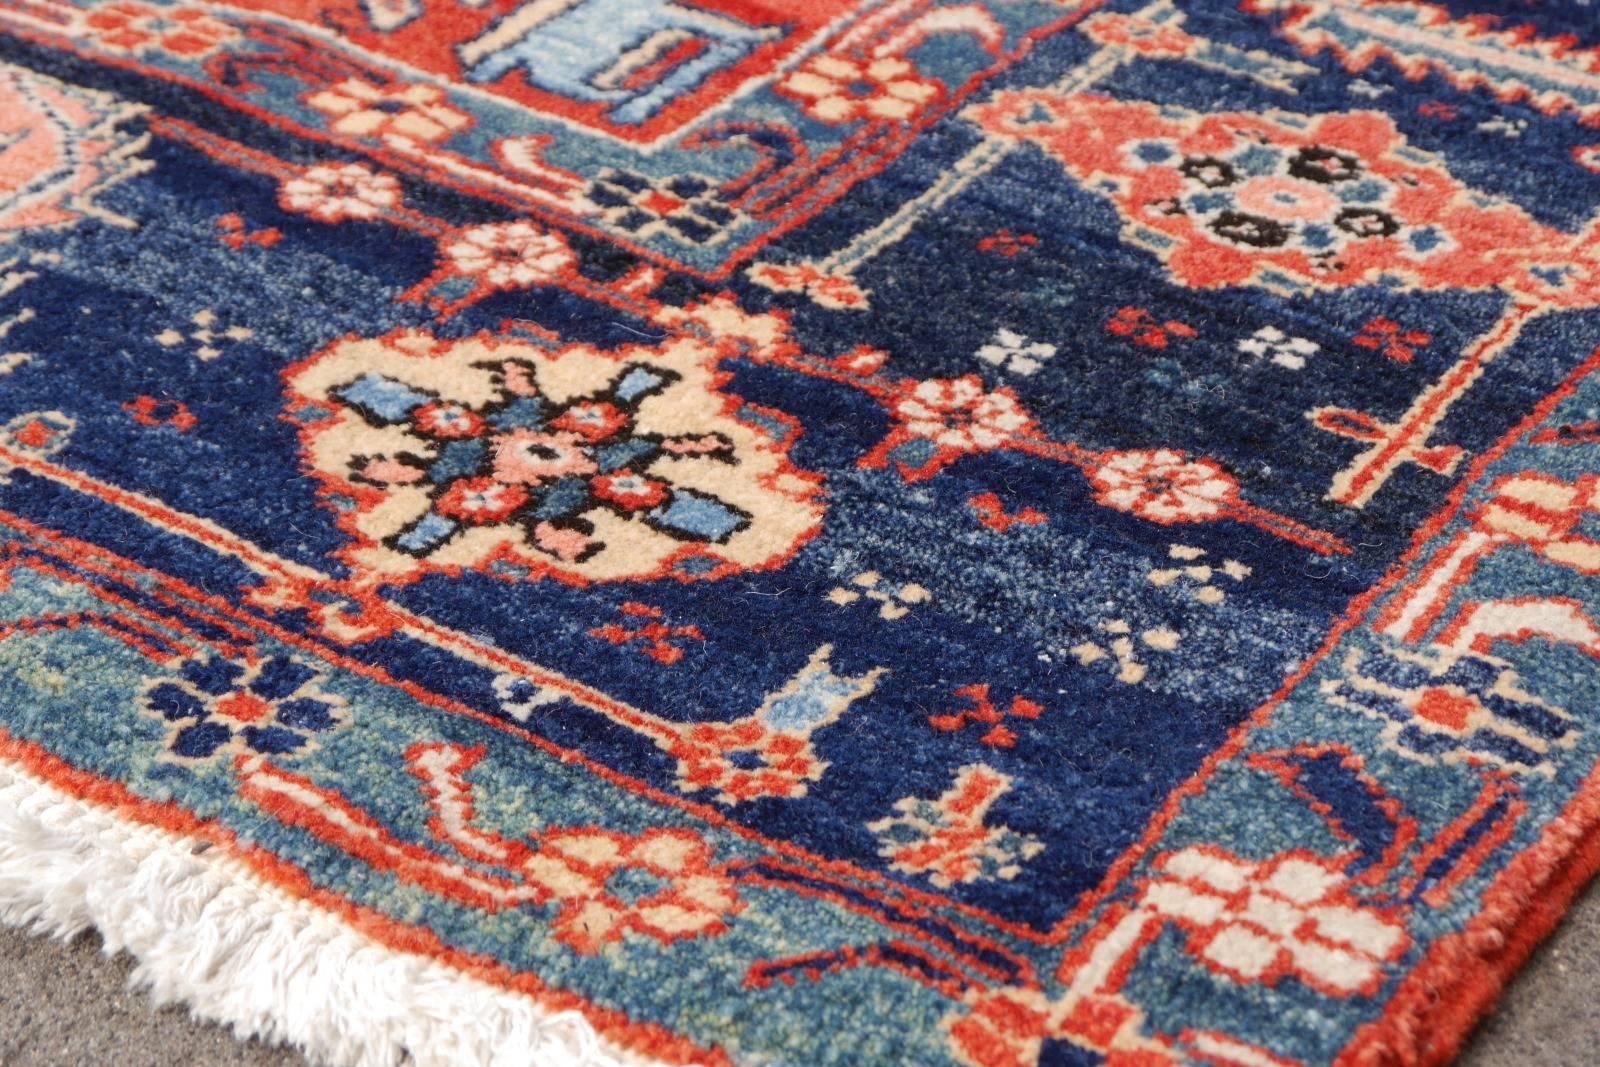 A large sized Azeri Heriz rug. The pile is made of high end quality wool - hand spun, hand dyed with all vegetable dyes and knotted by master weavers. The rug is very dense and heavy, about 65 kg or 142 lb. The condition is exquisite. The rug was